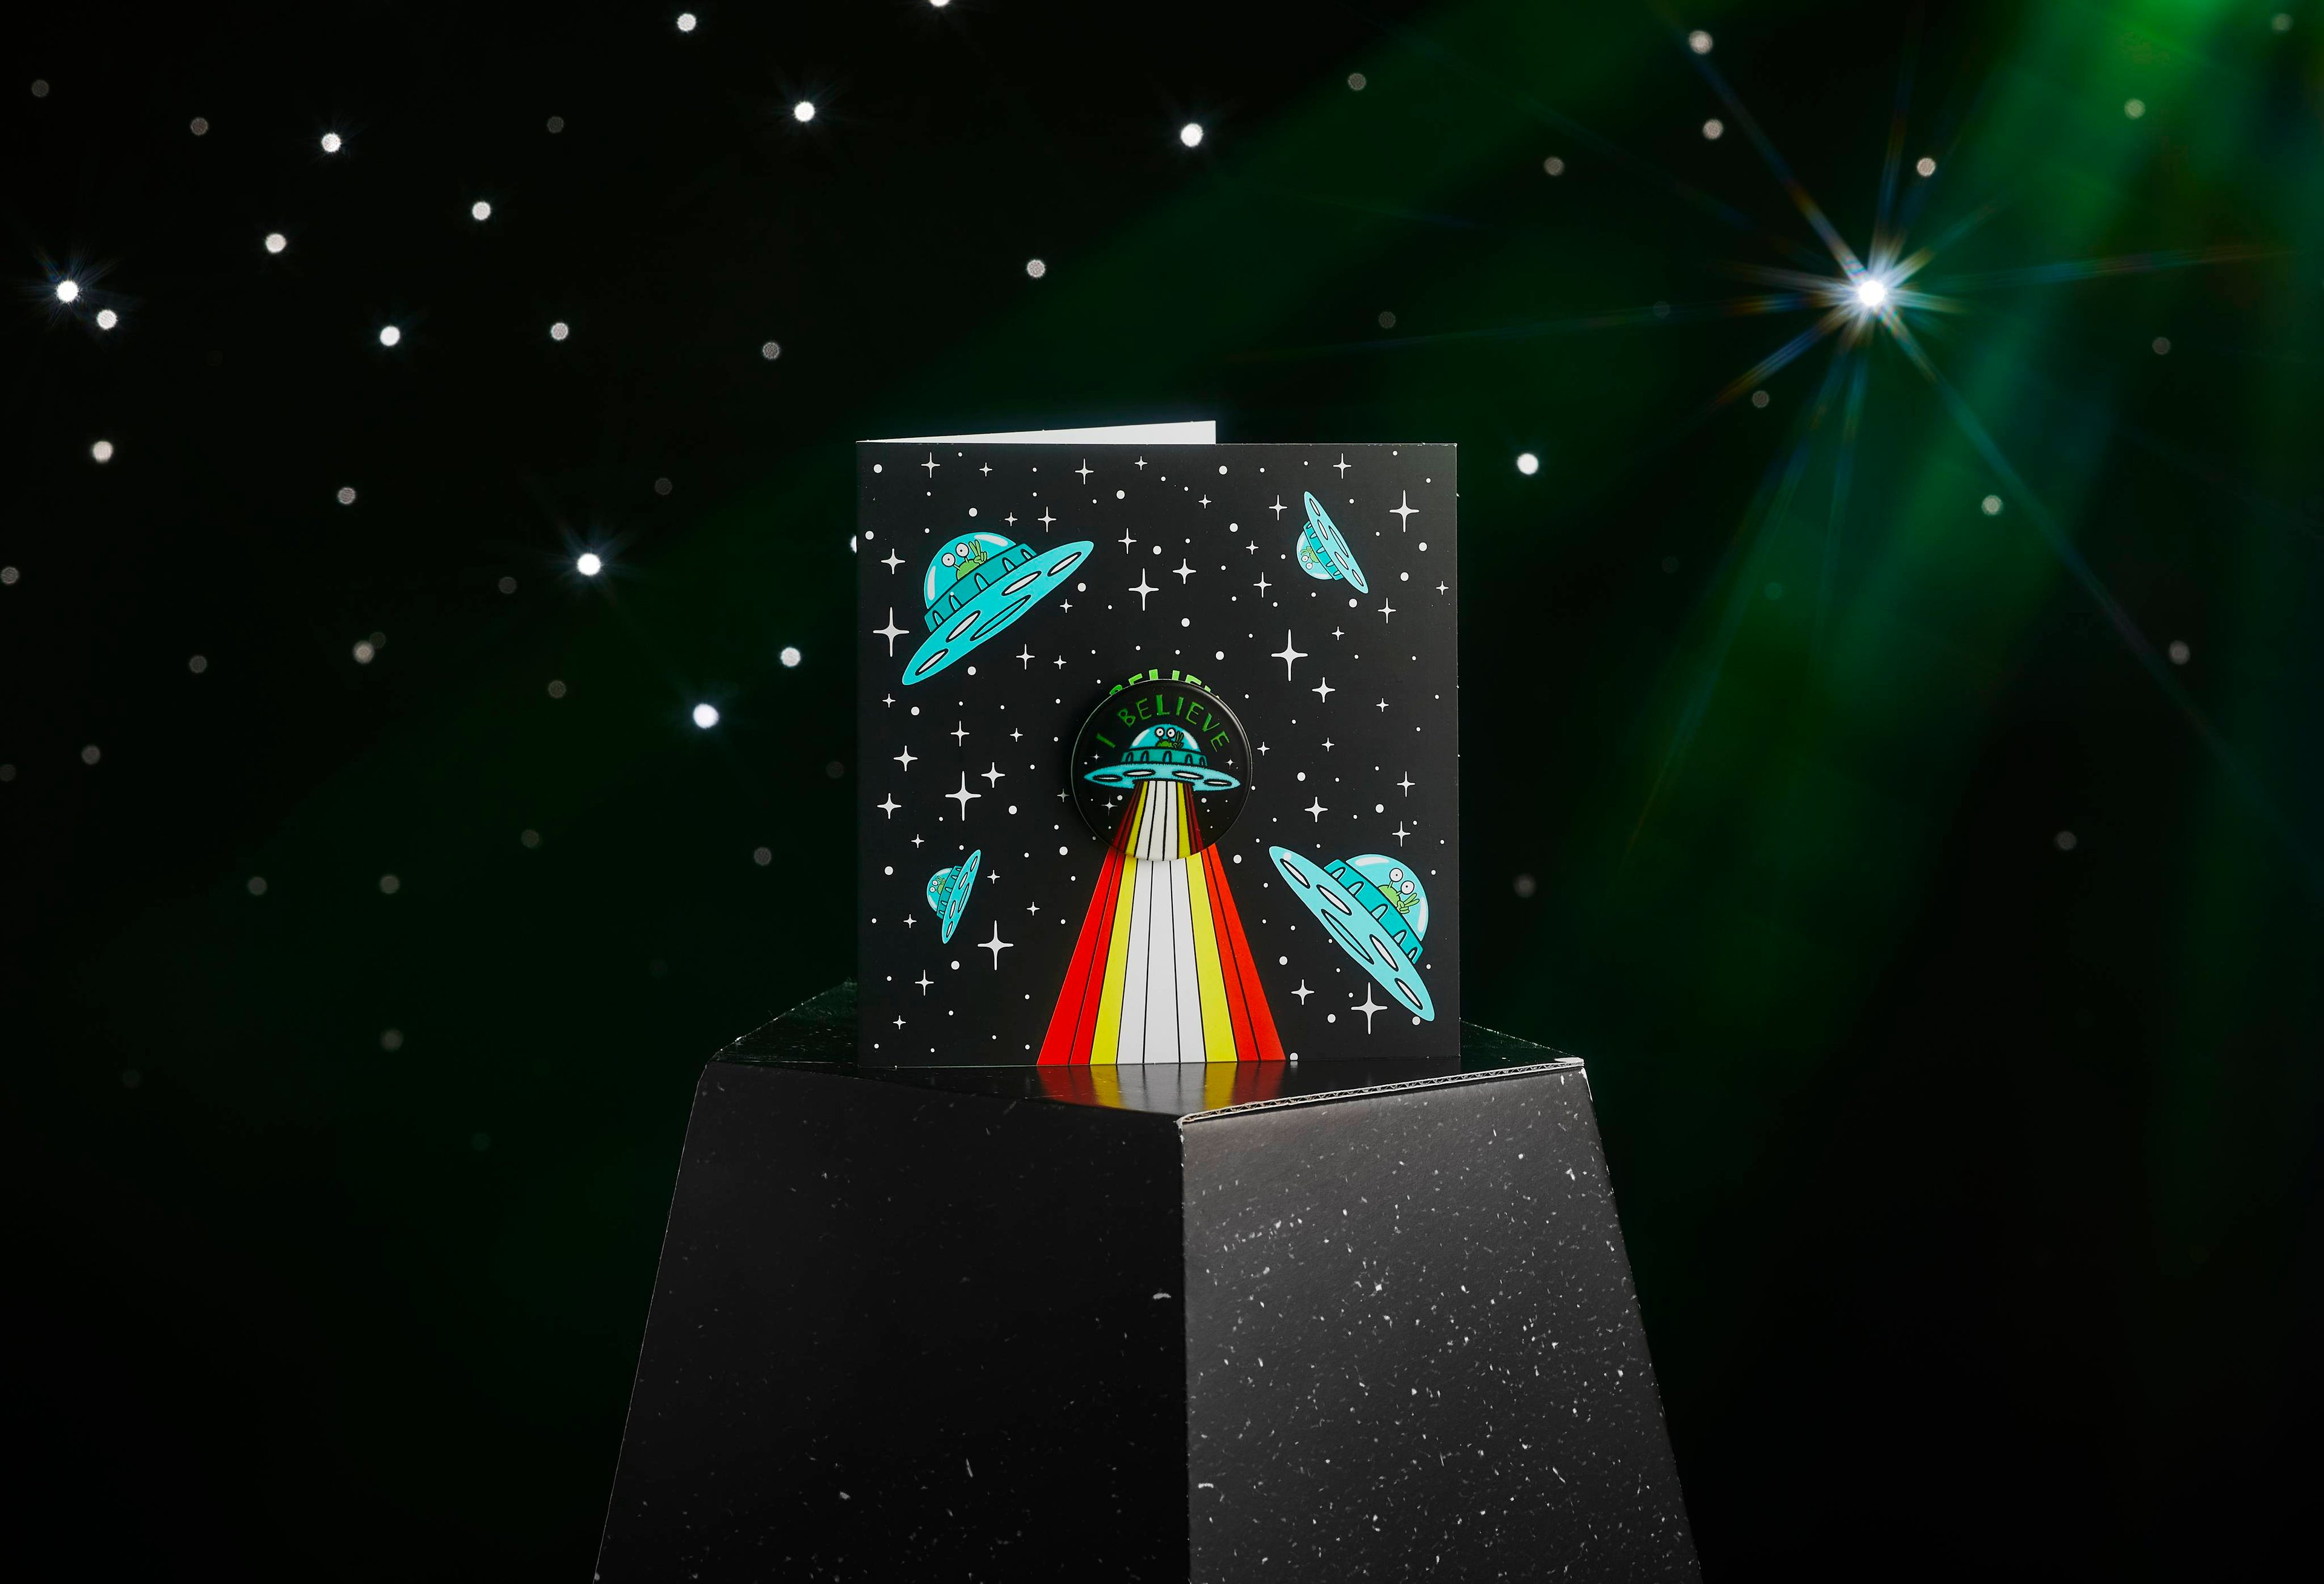 Image shows the I Believe greetings card displayed on a stand on an emerald, twinkling background. 